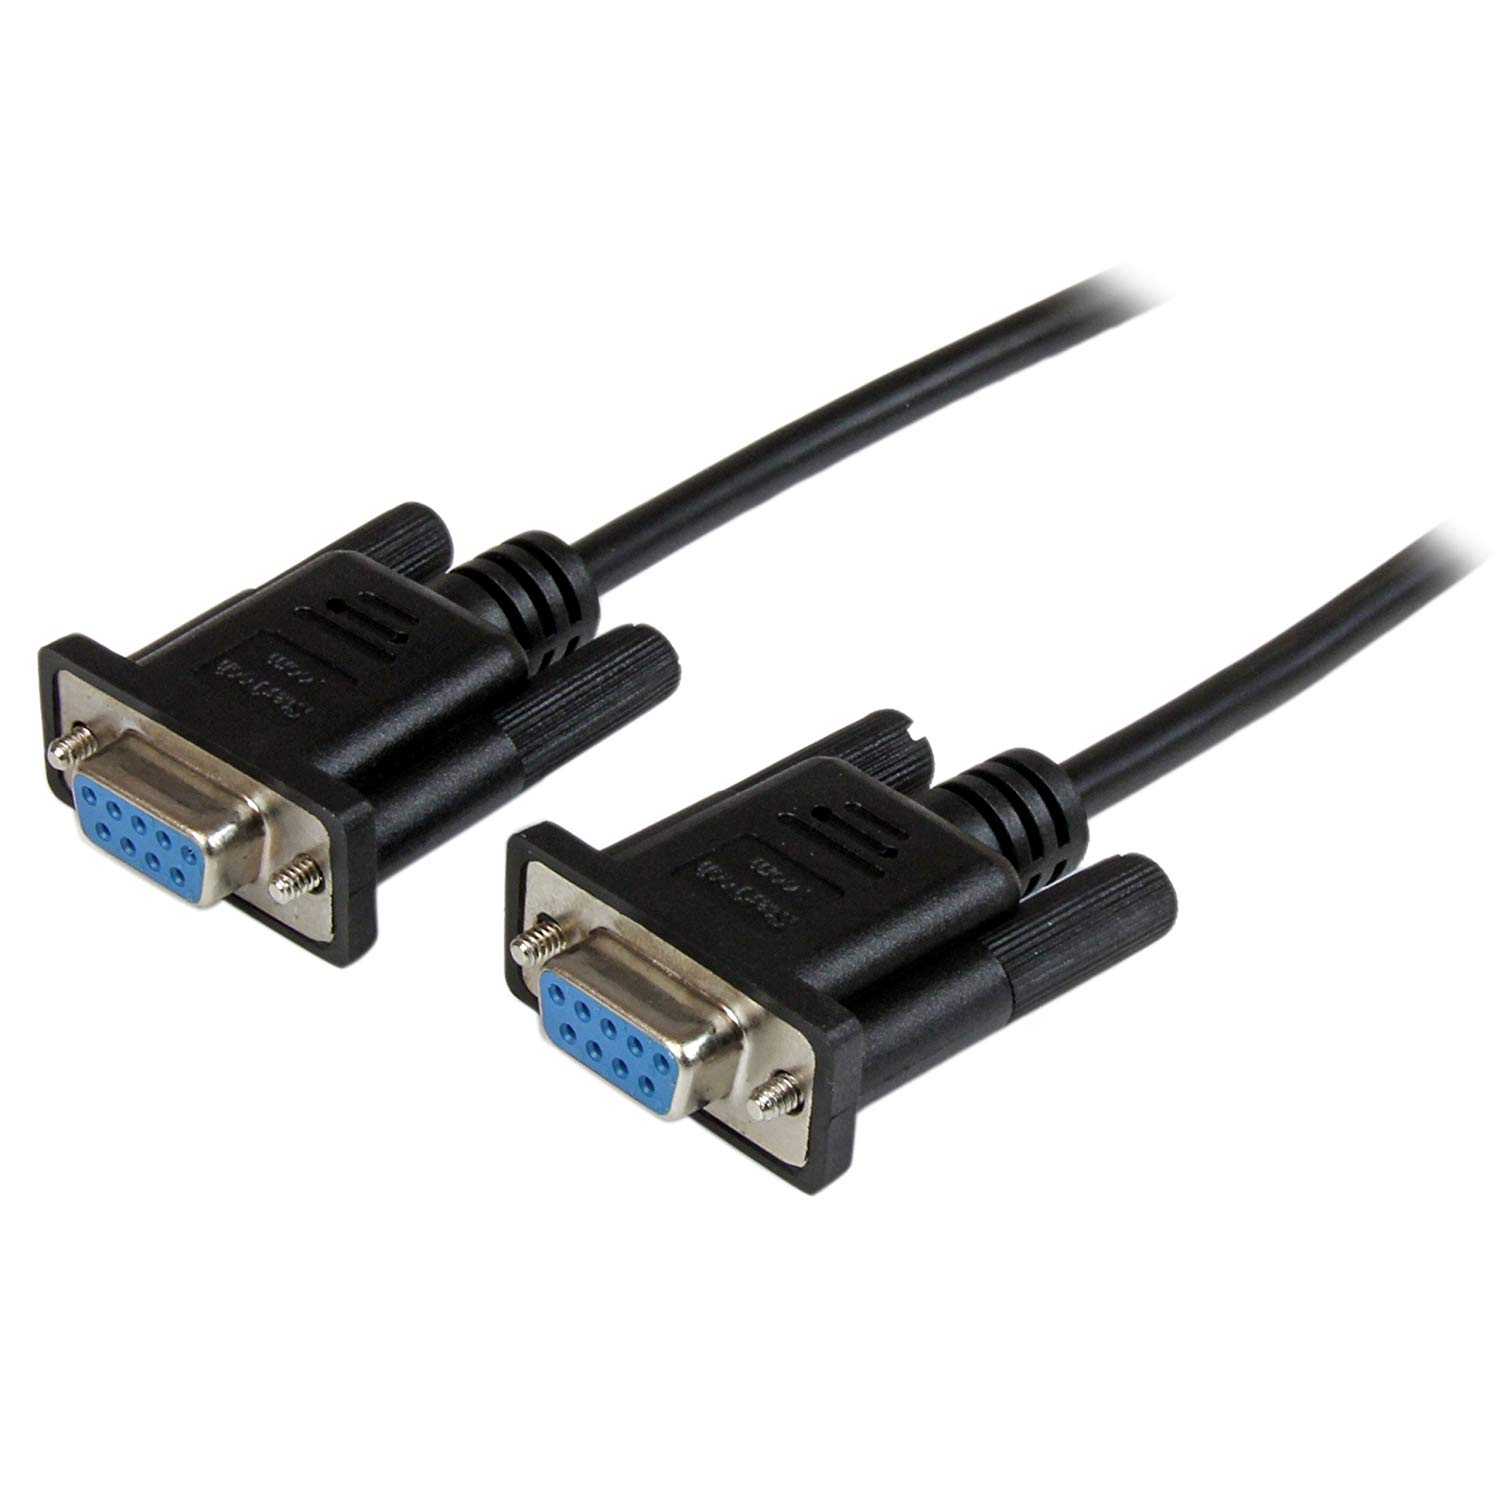 StarTech.com DB9 RS232 Serial Null Modem Cable F/F - DB9 Female to Female - 9-Pin RS232 Null Modem Cable, 2-Meter, Black (SCNM9FF2MBK)